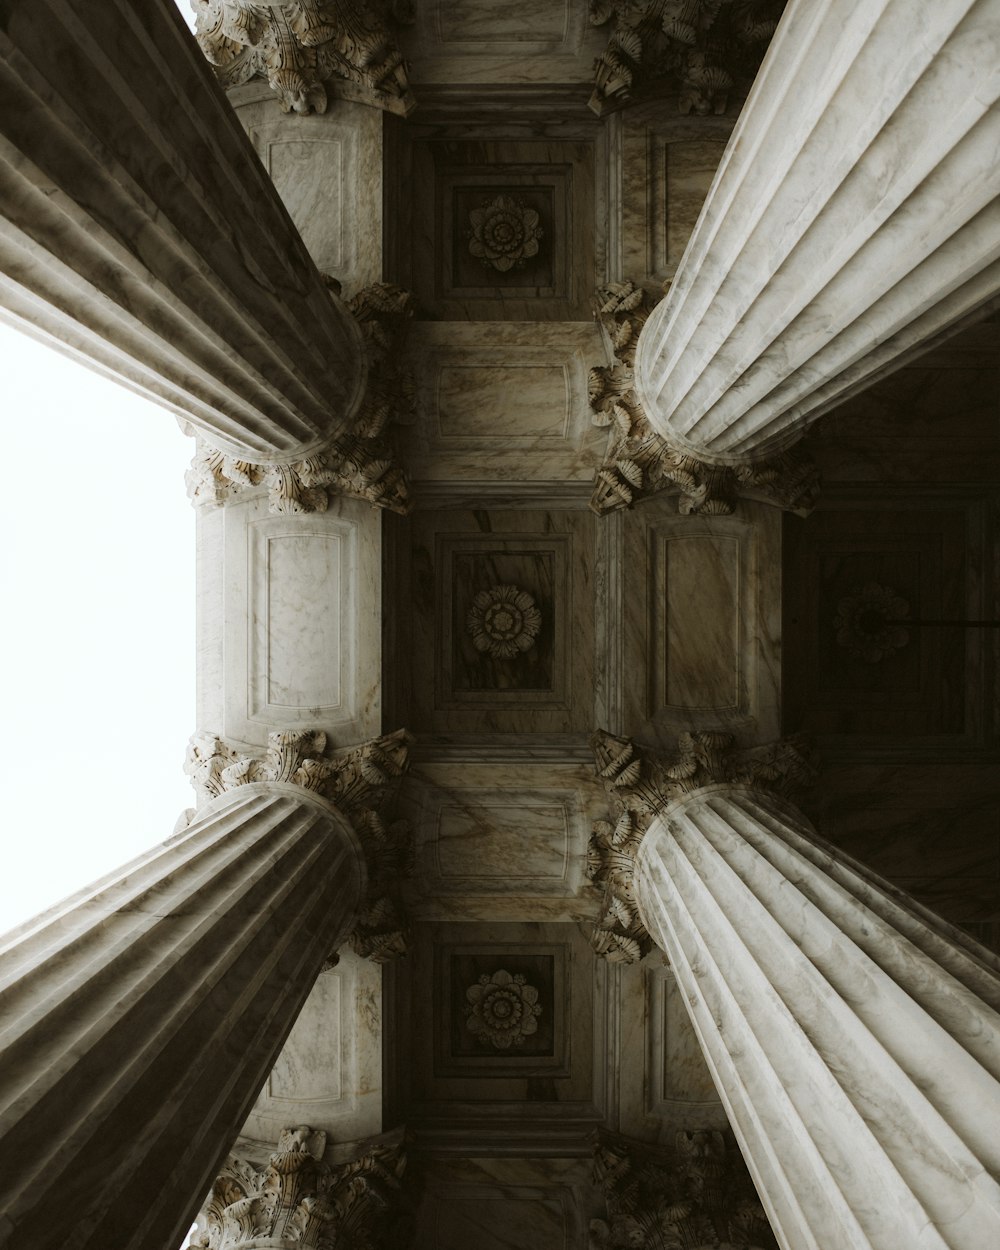 a view of the ceiling of a building with columns